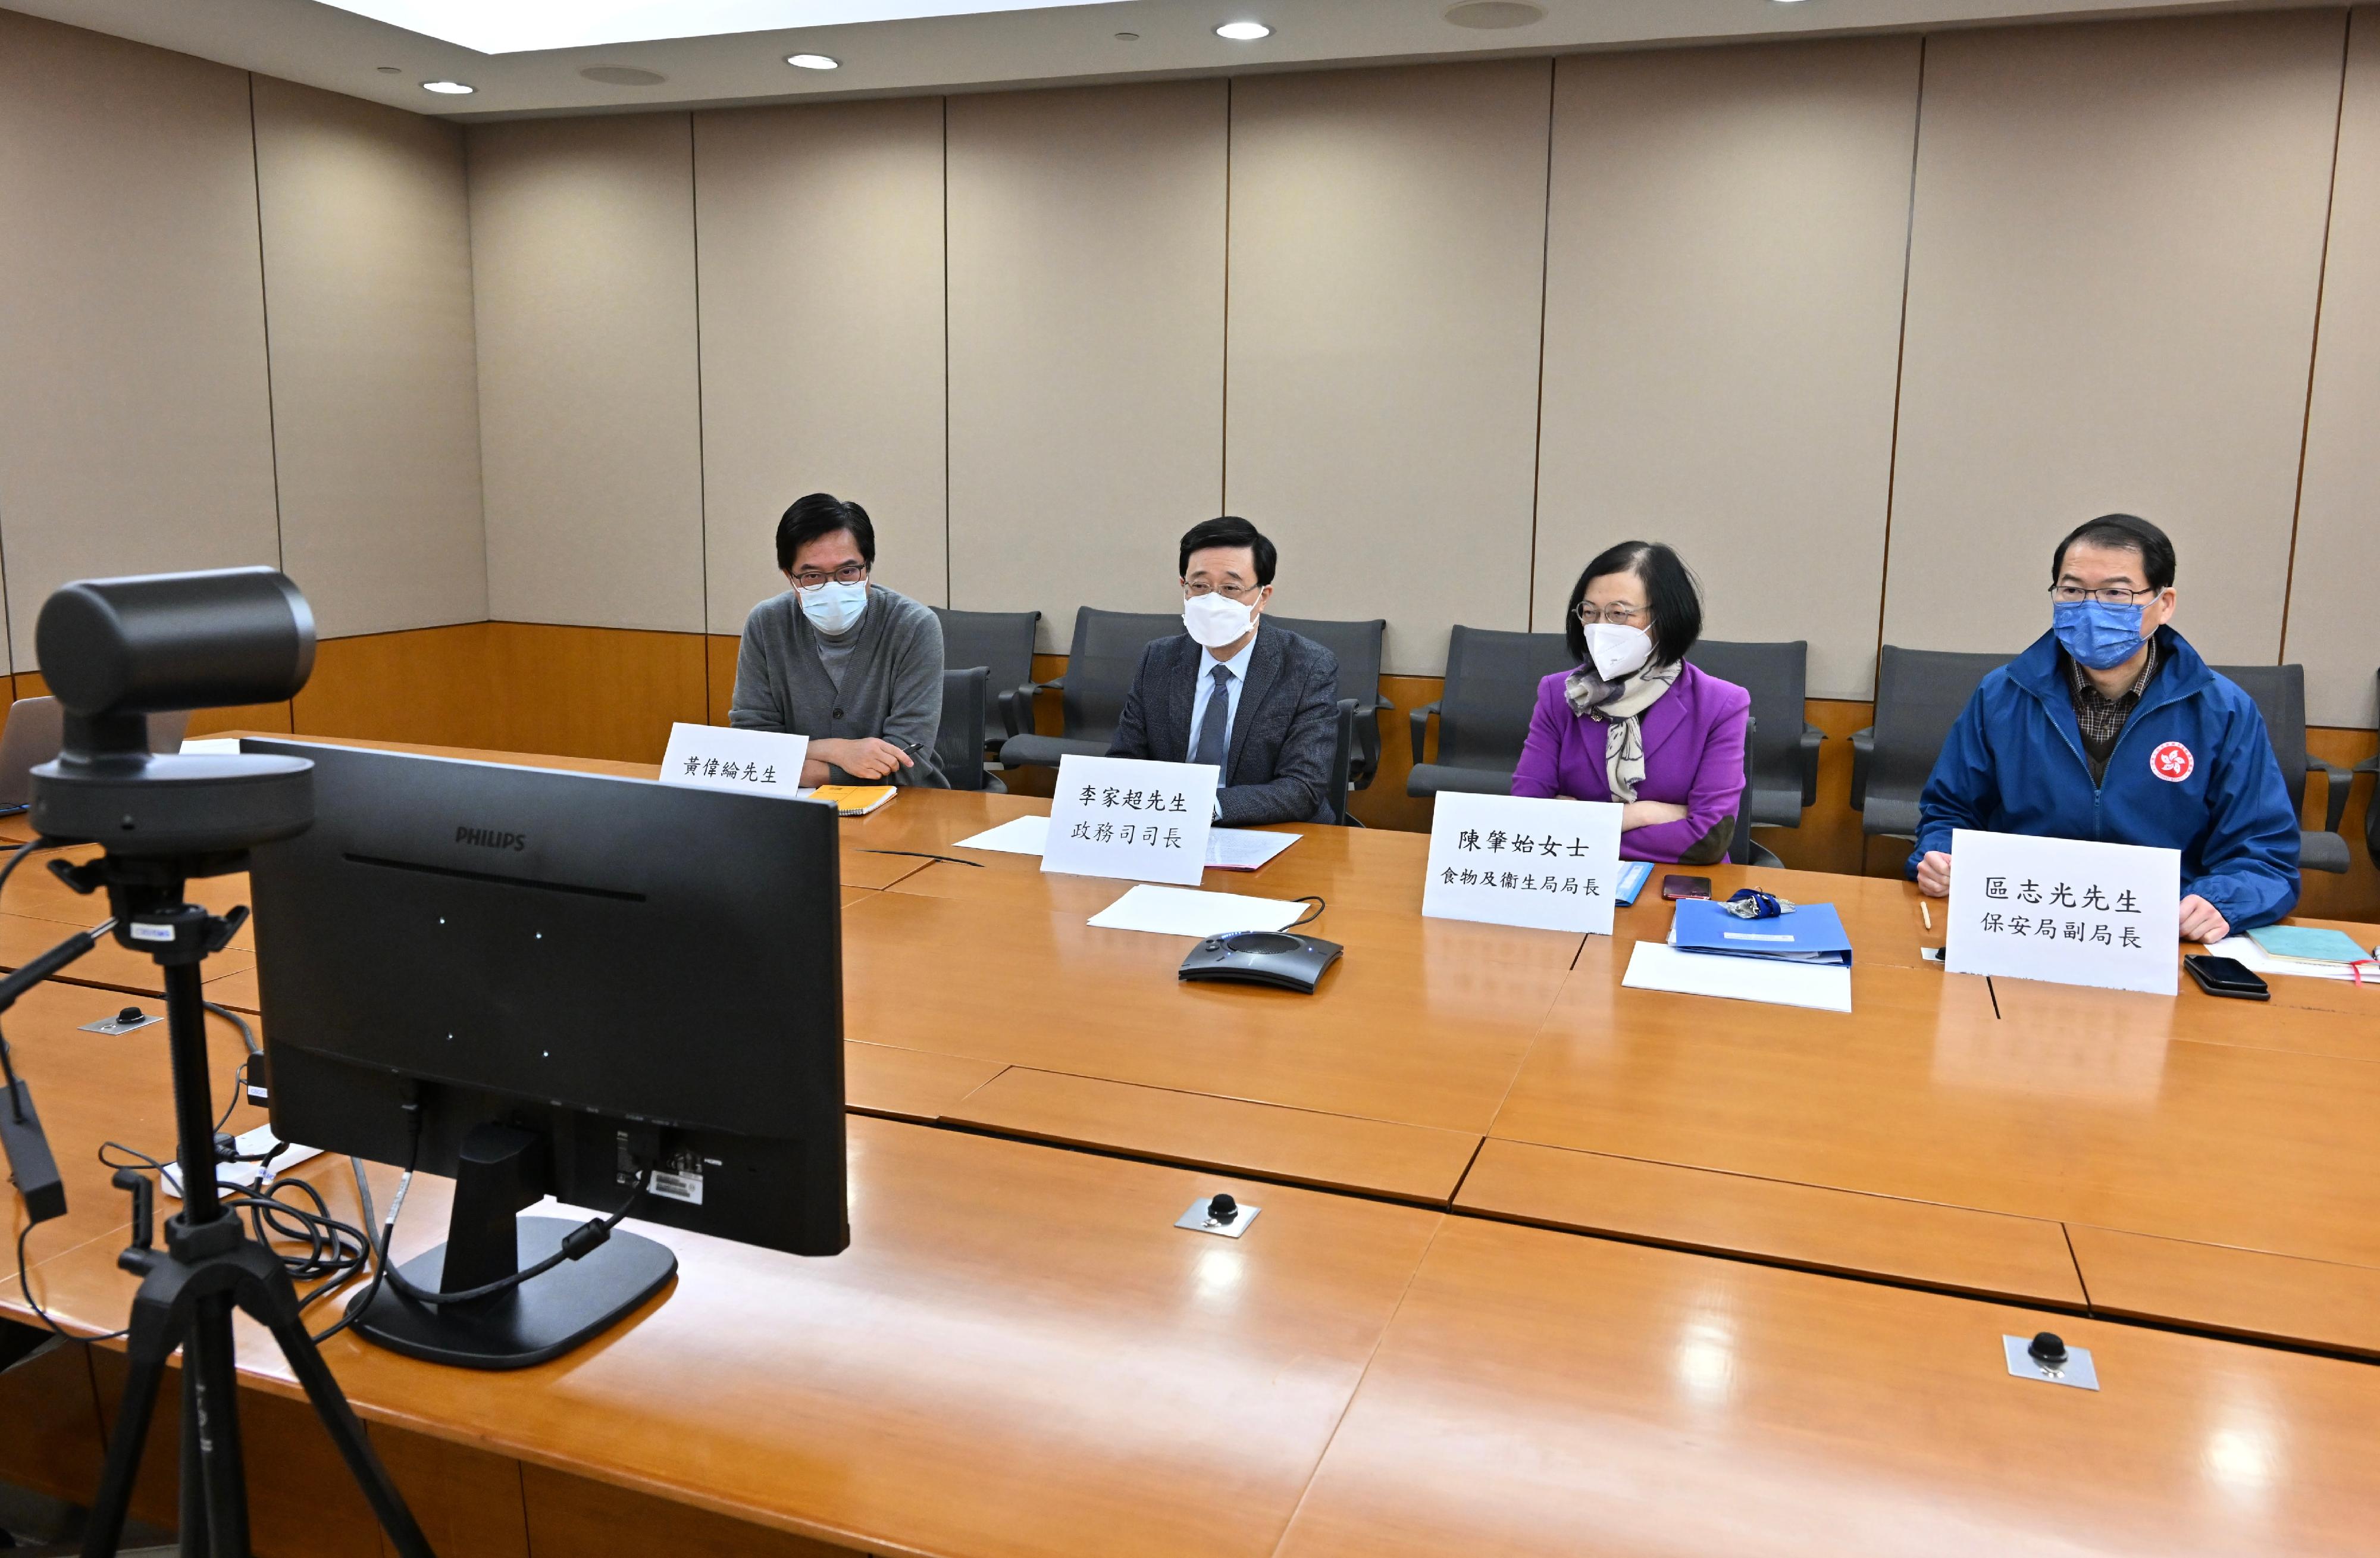 The Chief Secretary for Administration, Mr John Lee, held meetings today (February 28) on the commencement of the Tsing Yi community isolation facility. Photo shows Mr Lee (second left) holding a meeting with the Liaison Office of the Central People's Government in the Hong Kong Special Administrative Region and the contractor via video conferencing to follow up on the construction progress of the Tsing Yi community isolation facility. Looking on are the Secretary for Food and Health, Professor Sophia Chan (second right); the Secretary for Development, Mr Michael Wong (first left); and the Under Secretary for Security, Mr Sonny Au (first right).